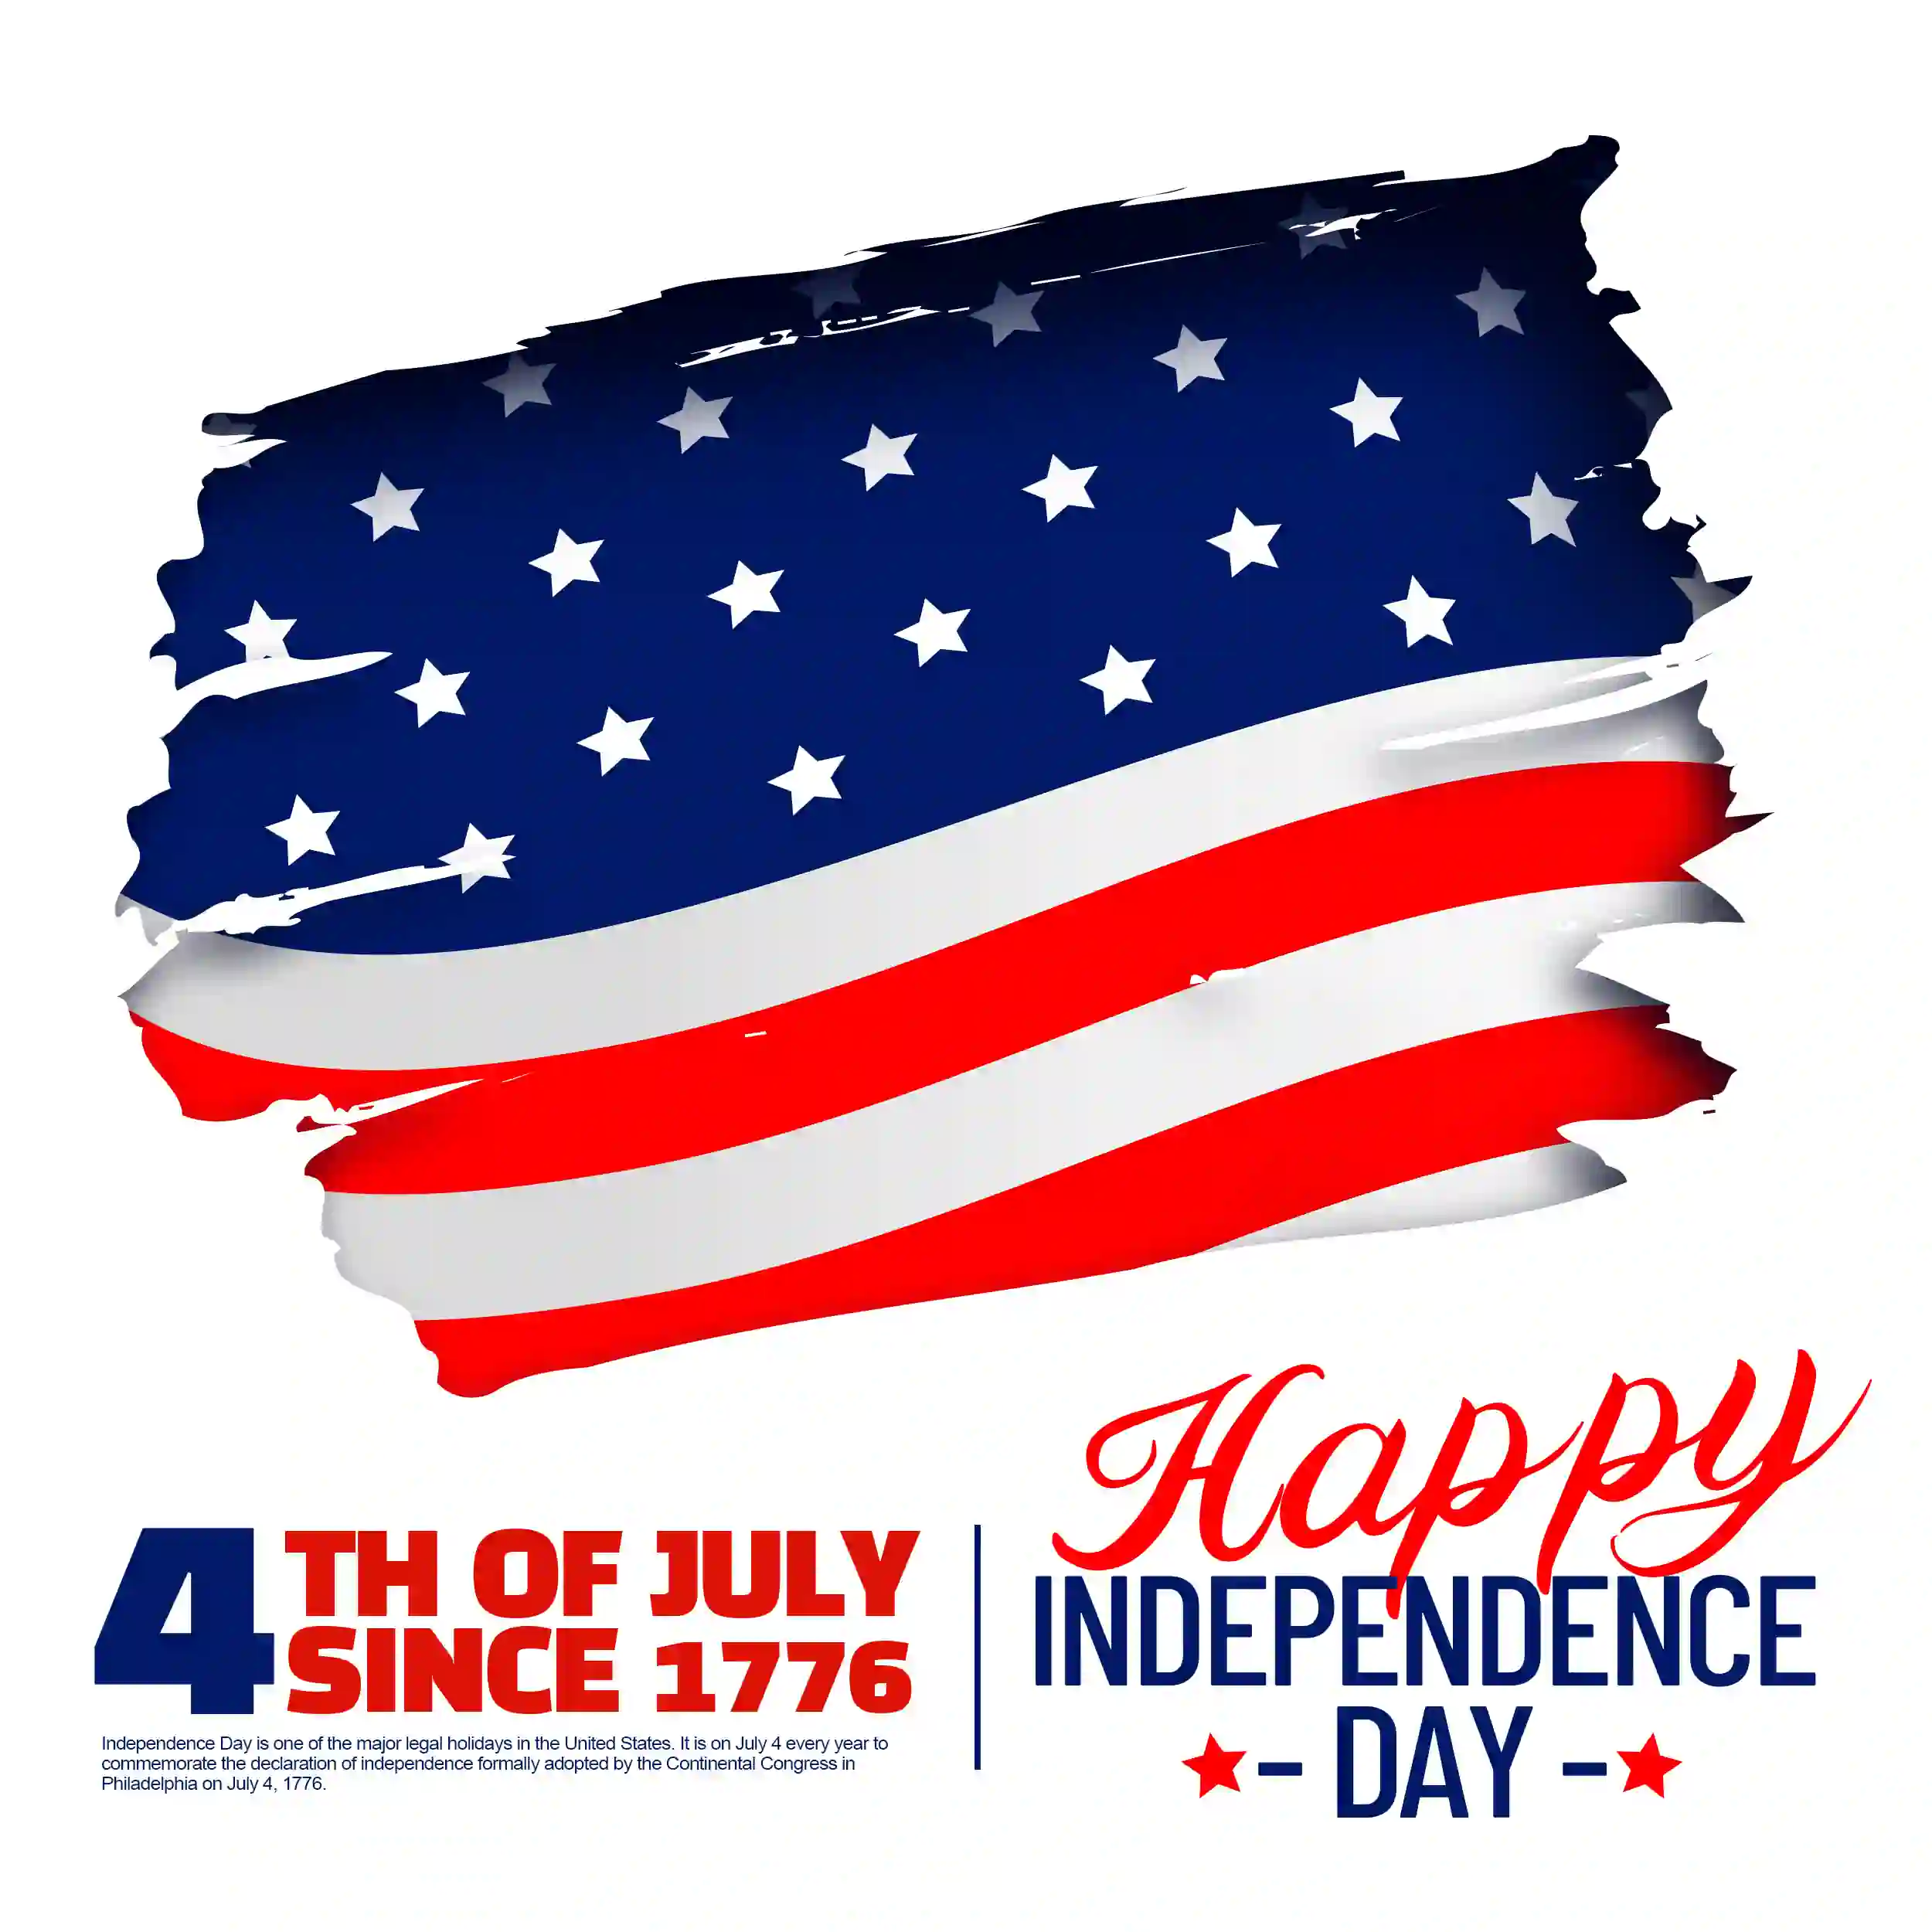 American Independence Day Social Media Poster PSD Free Download